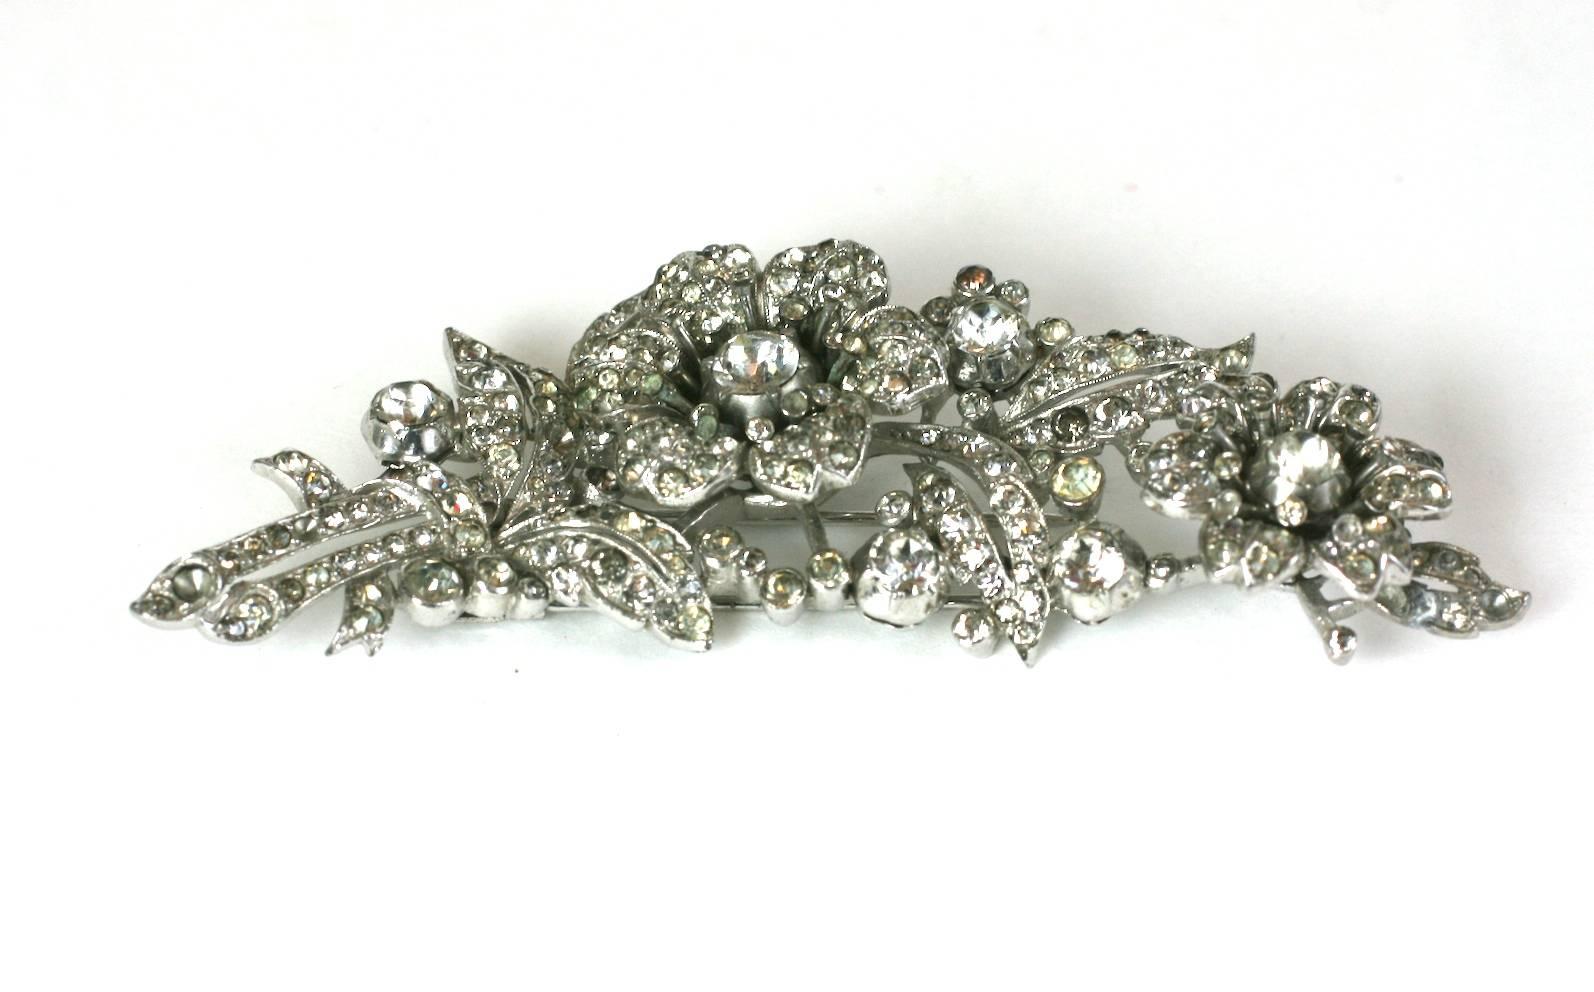 Trifari Alfred Philippe Regence Pave Georgian Revival multi tremblant rose clip brooch of rhodium plated metal, and faceted crystal rhinestones.  Marked: Trifari with Crown, 1930's USA.  Excellent condition. Clip Back Fitting.
Excellent